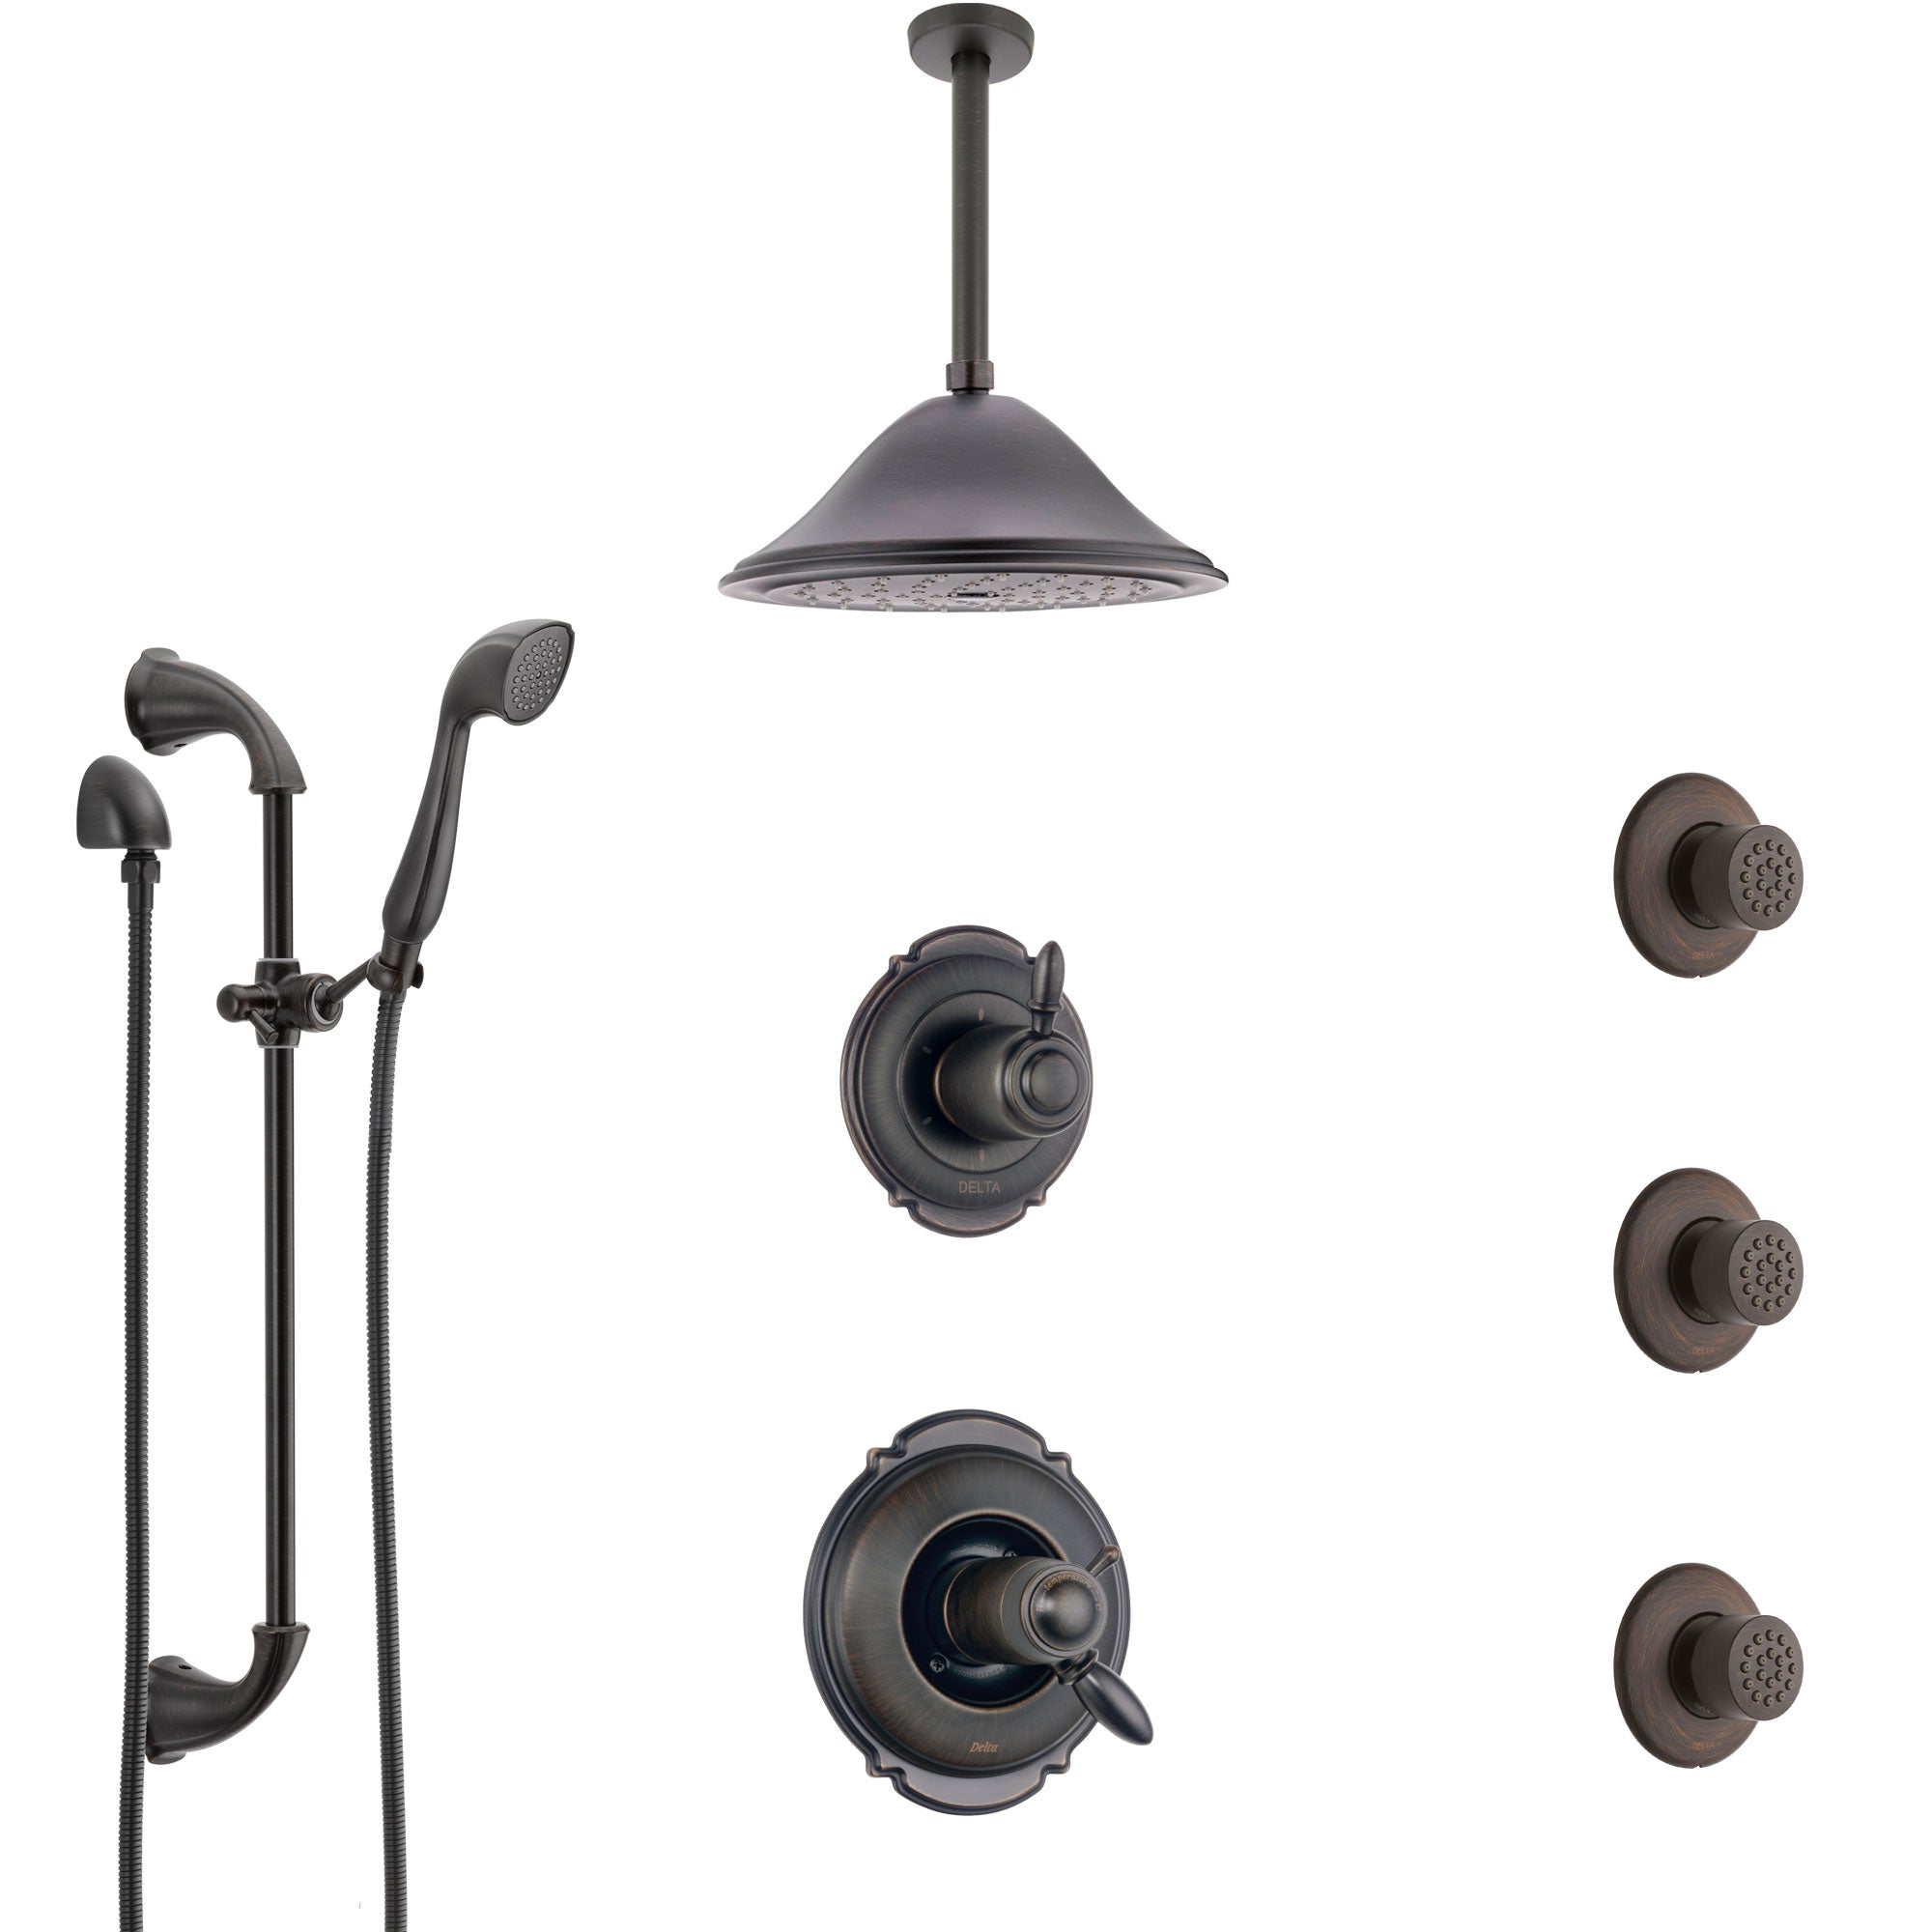 Delta Victorian Venetian Bronze Shower System with Dual Thermostatic Control, Diverter, Ceiling Showerhead, 3 Body Sprays, and Hand Shower SS17T552RB5